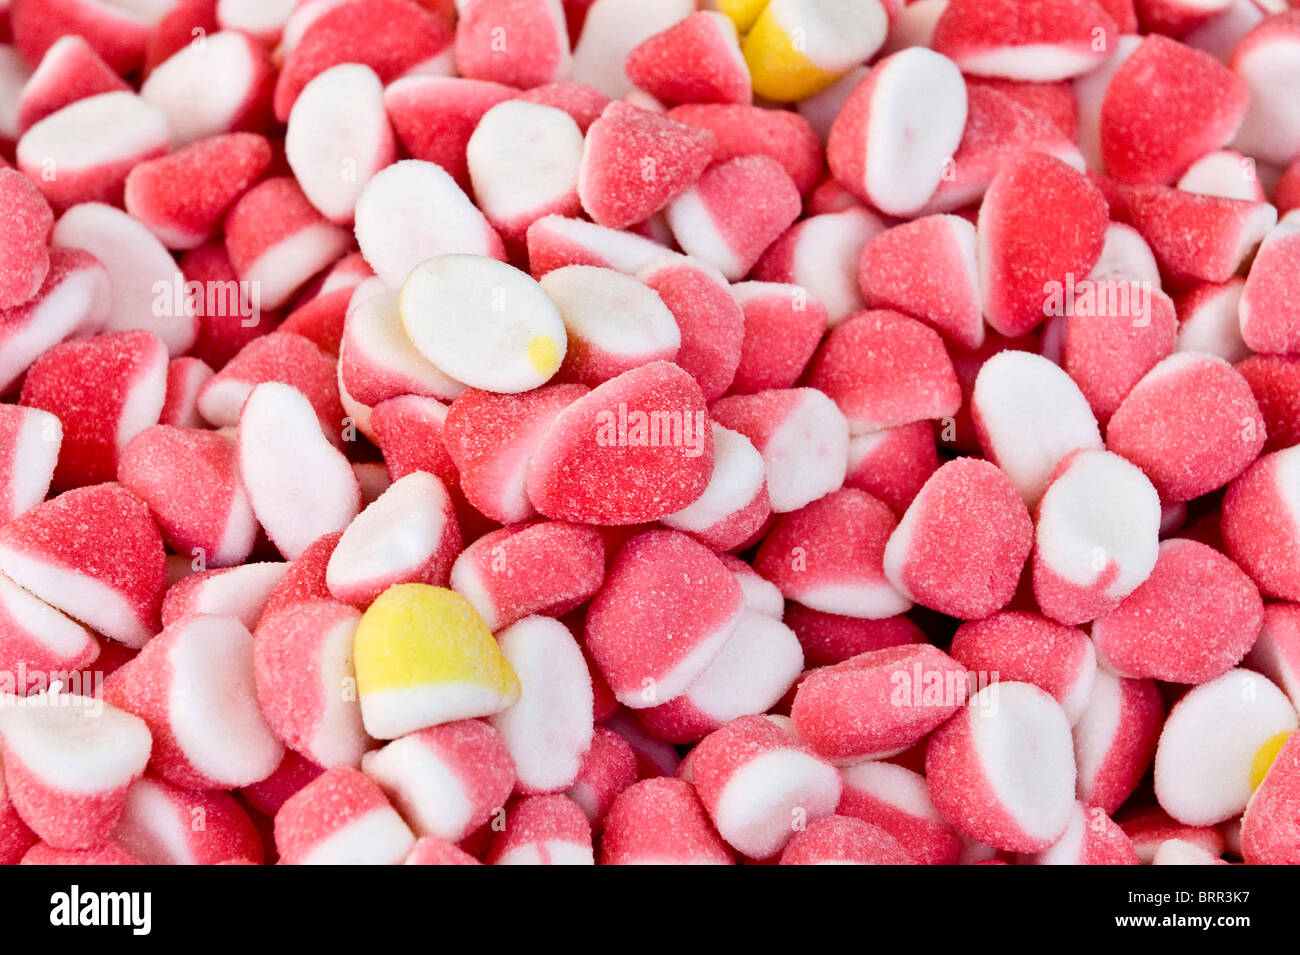 Close-up of pink and white jelly candies Stock Photo